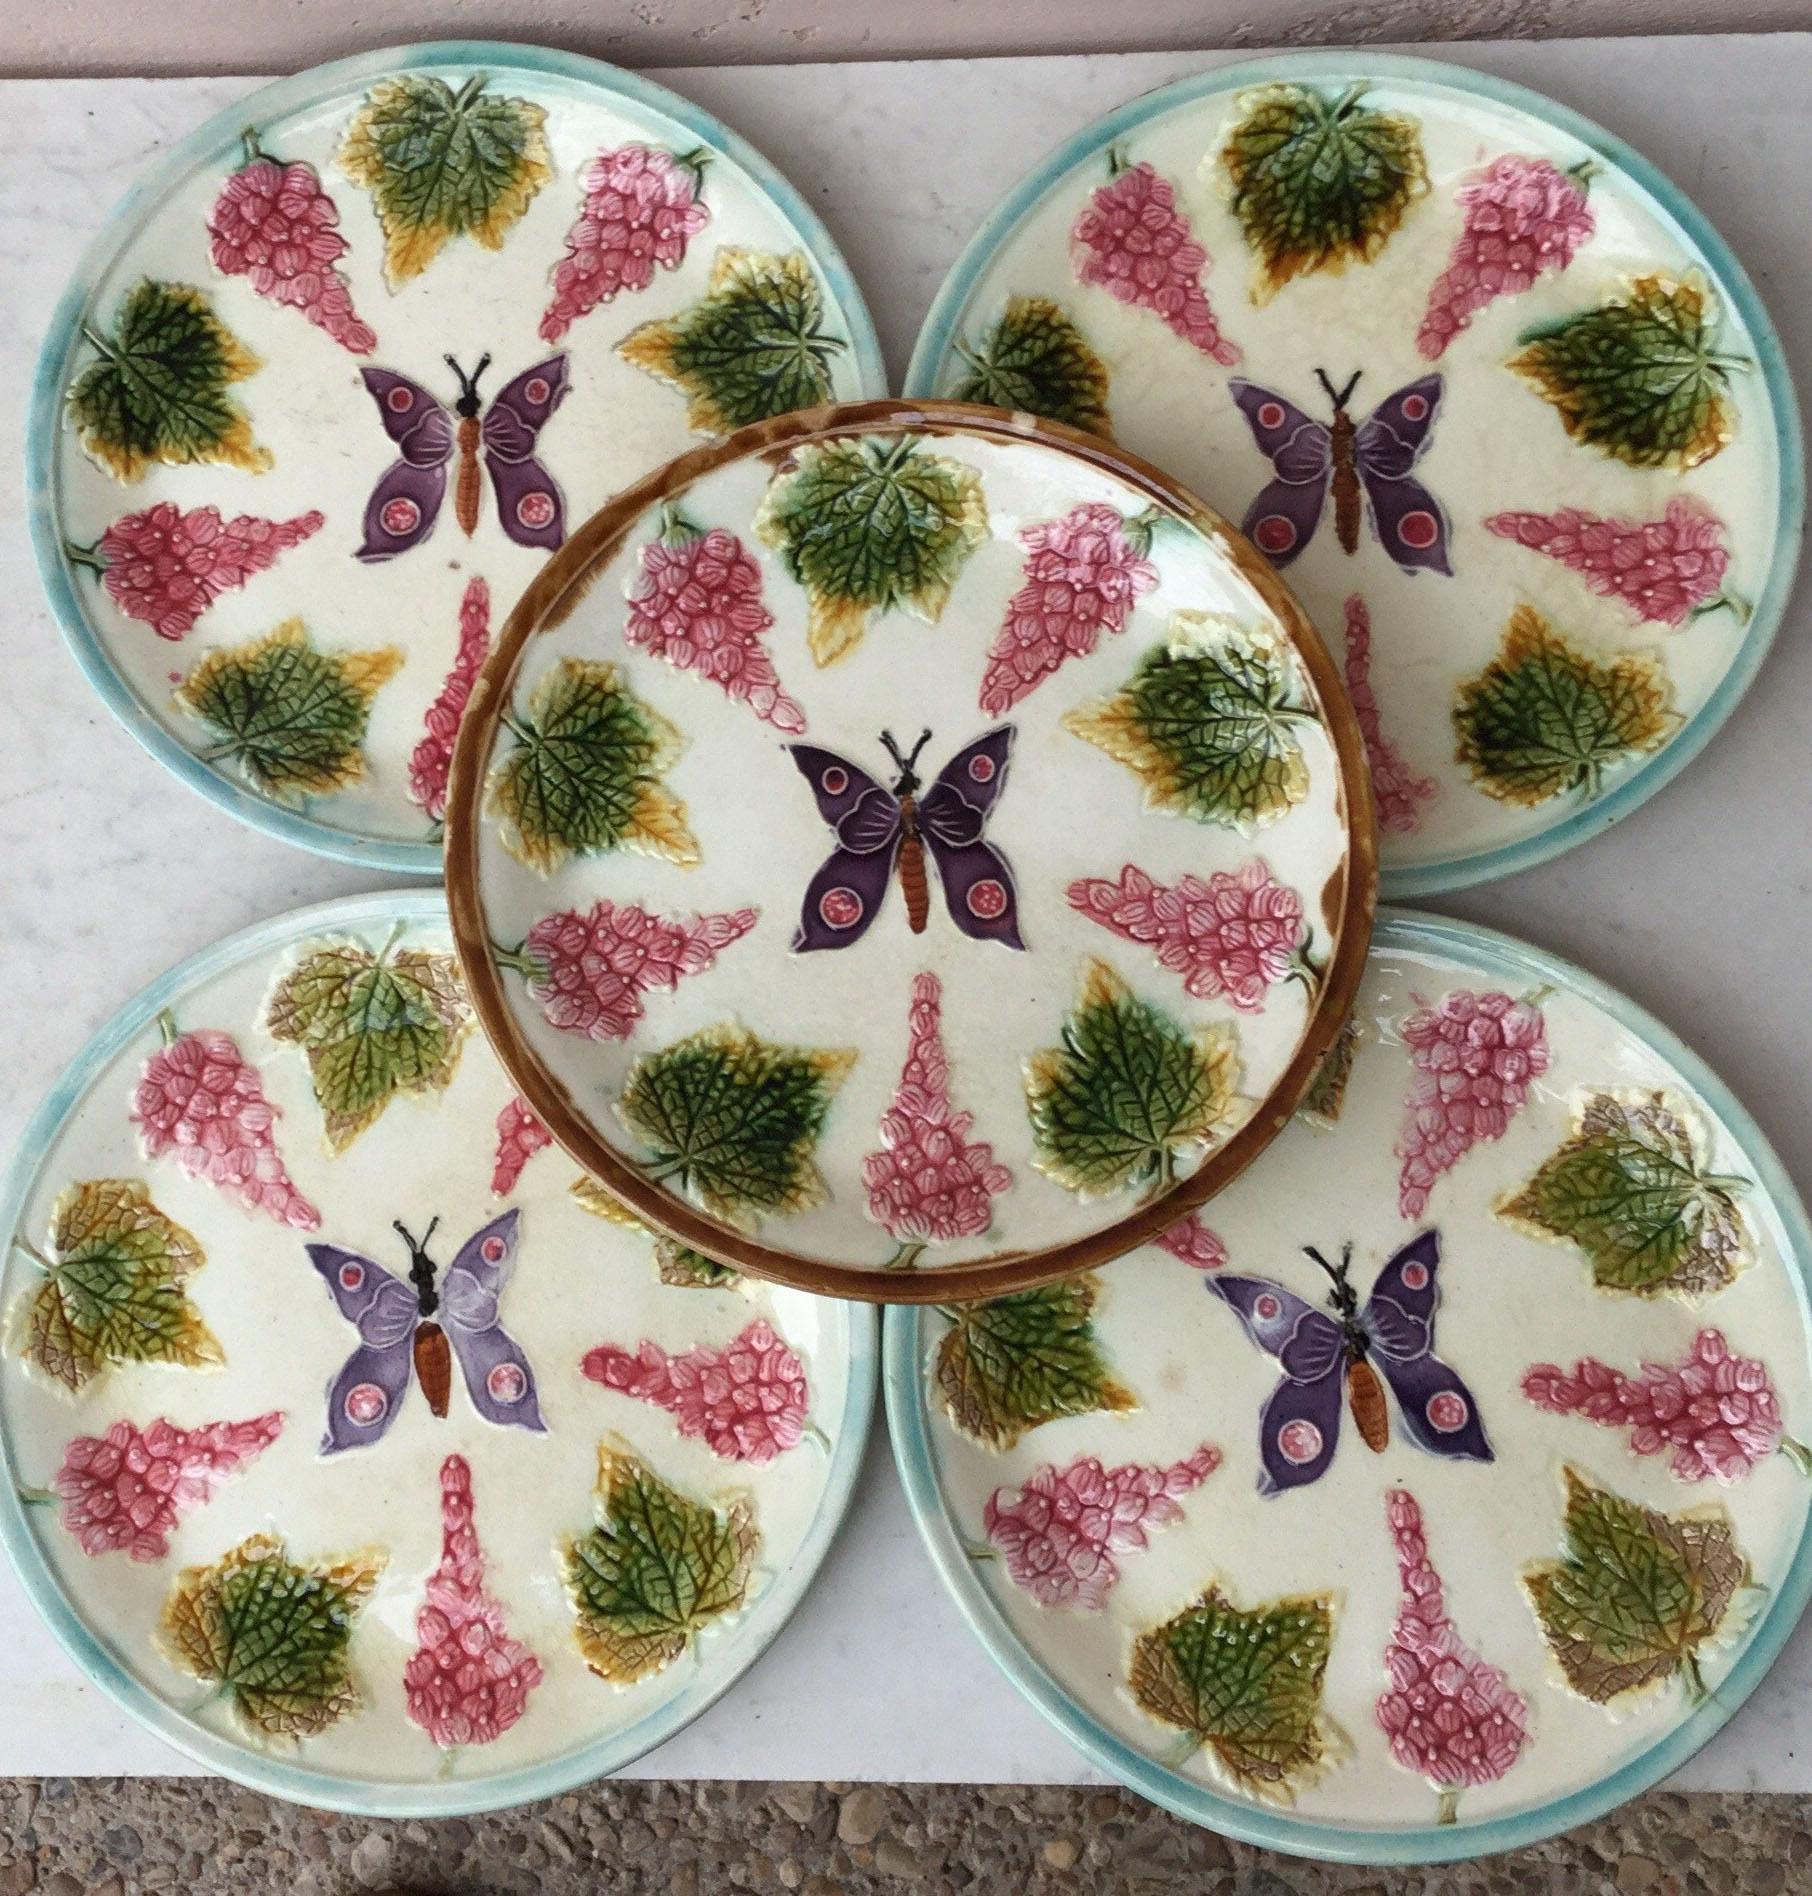 19th Century Majolica Flowers and Butterfly Plate Wasmuel, circa 1880